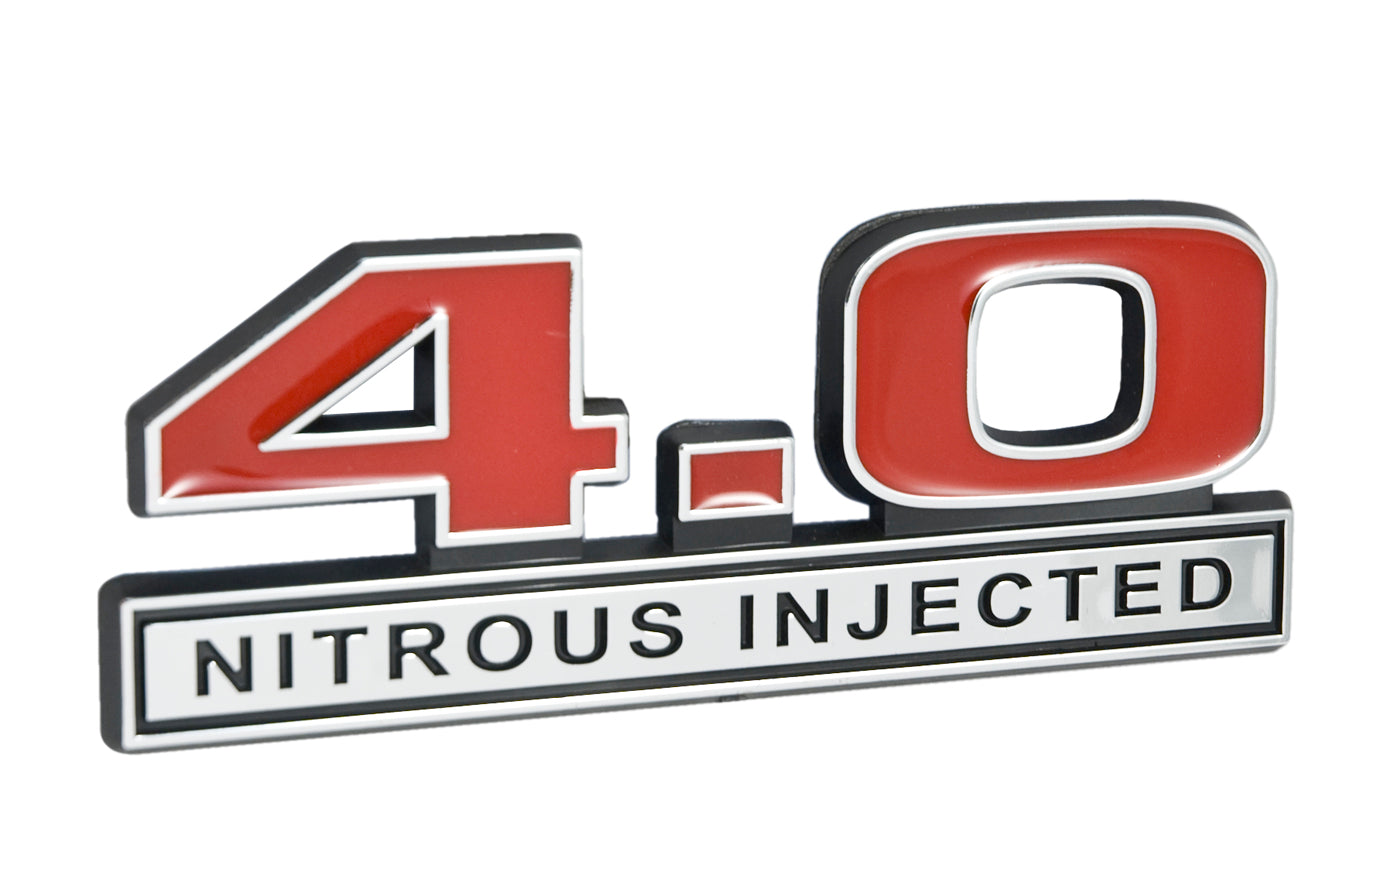 4.0 Nitrous Injected NOS Engine Emblem Badge Logo in Chrome & Red - 5" Long